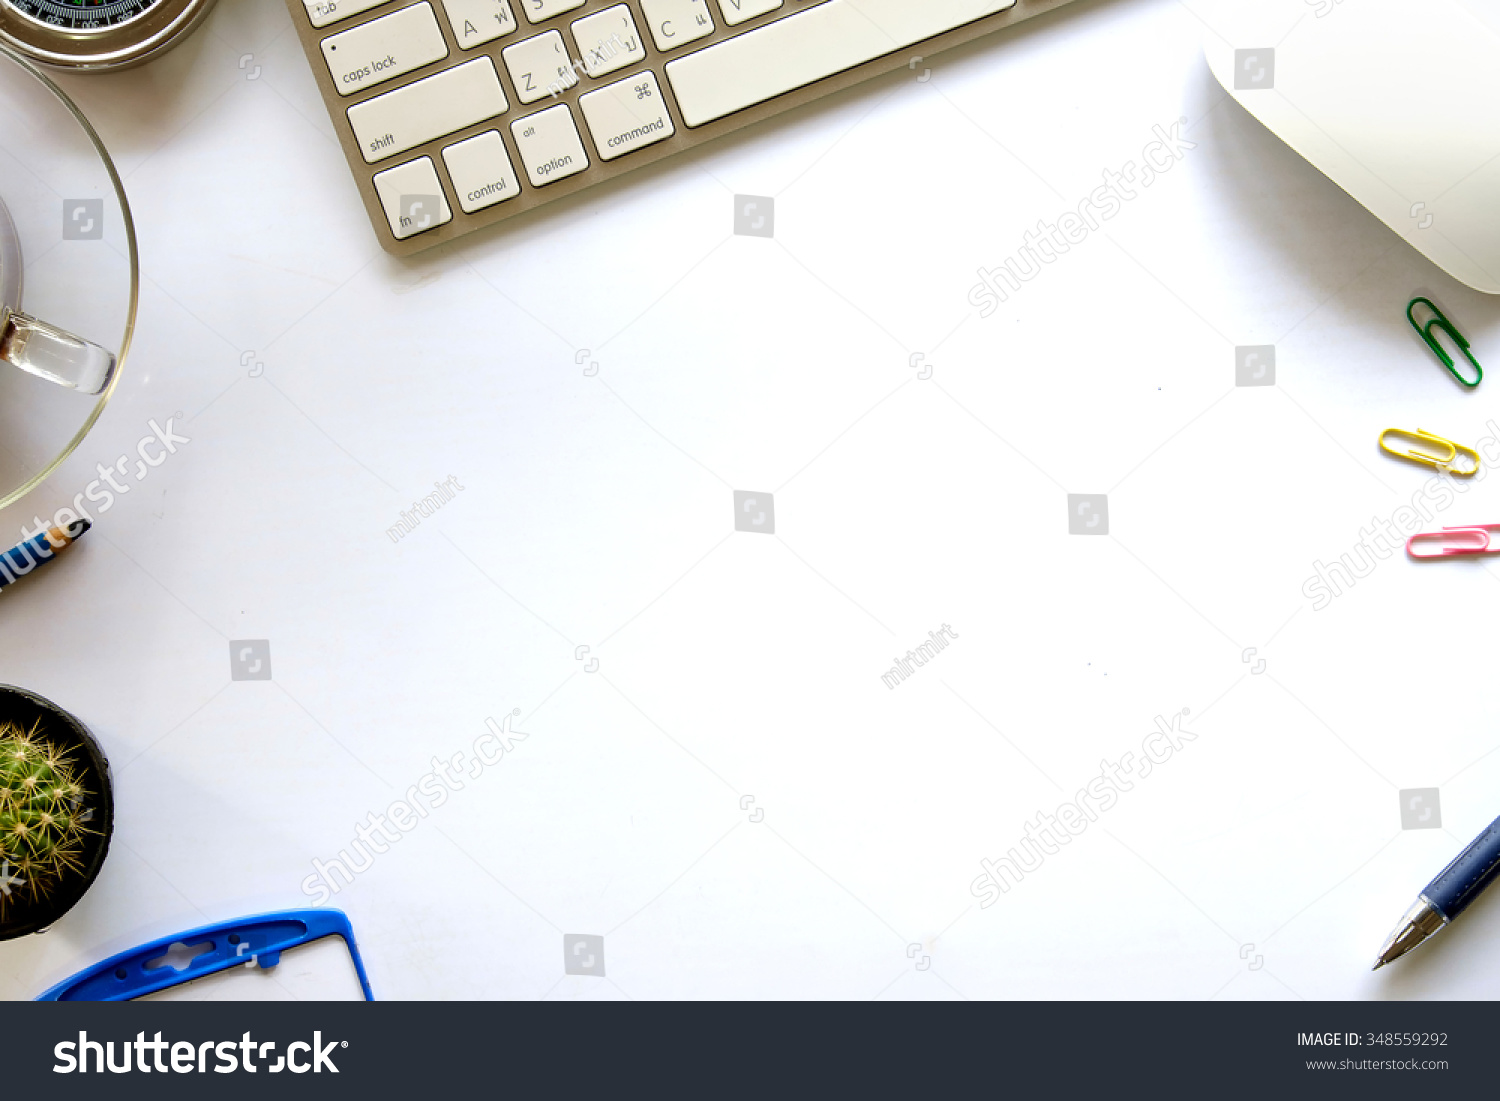 Office Desk Background With Keyboard And Cup Of Coffee